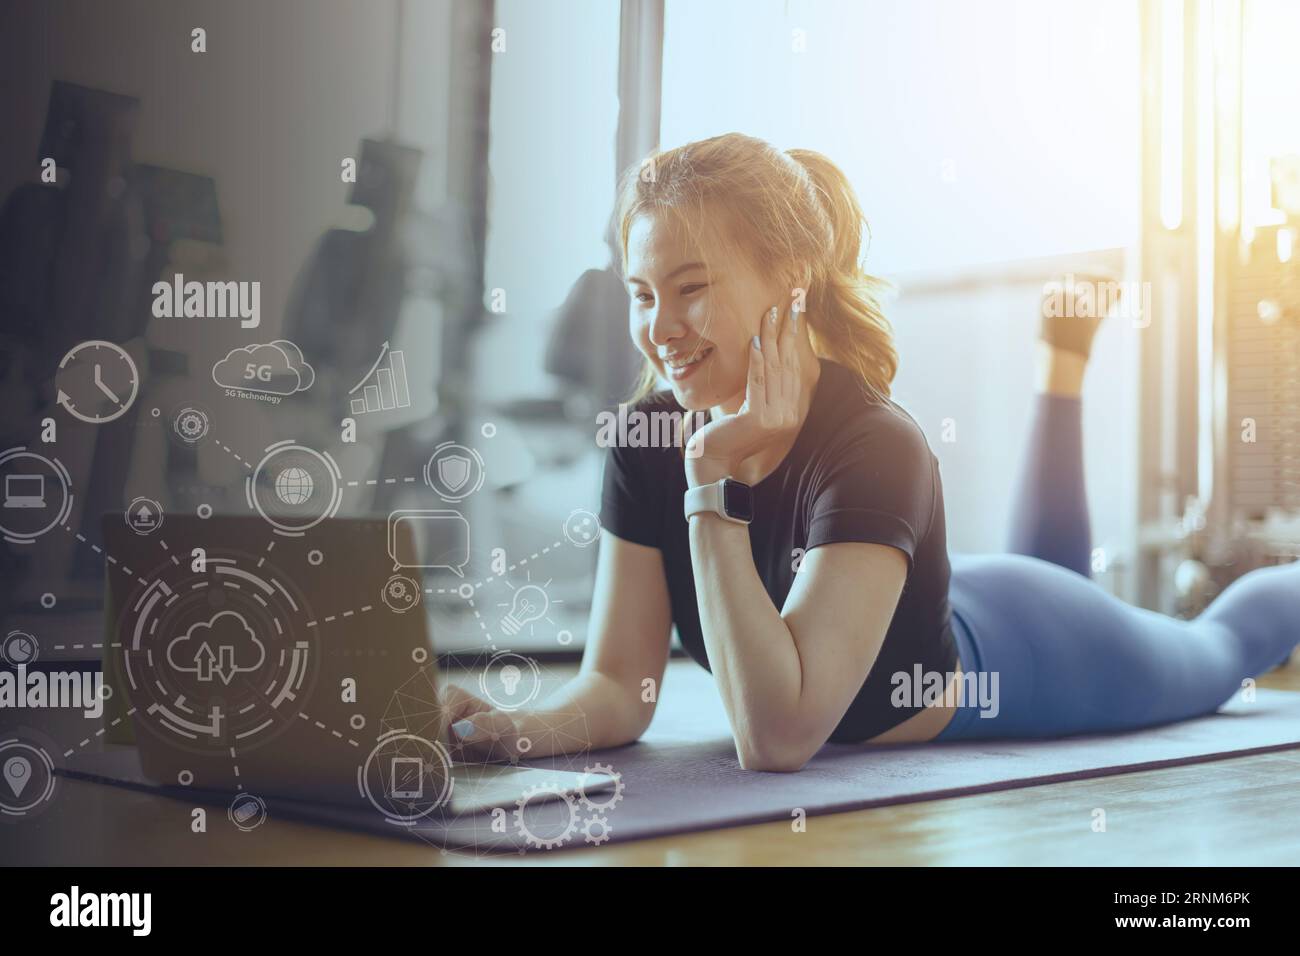 fitness lady relax smiling in gym body exercise activity leisure holiday. Happy healthy lifestyle young woman watching a laptop. Stock Photo